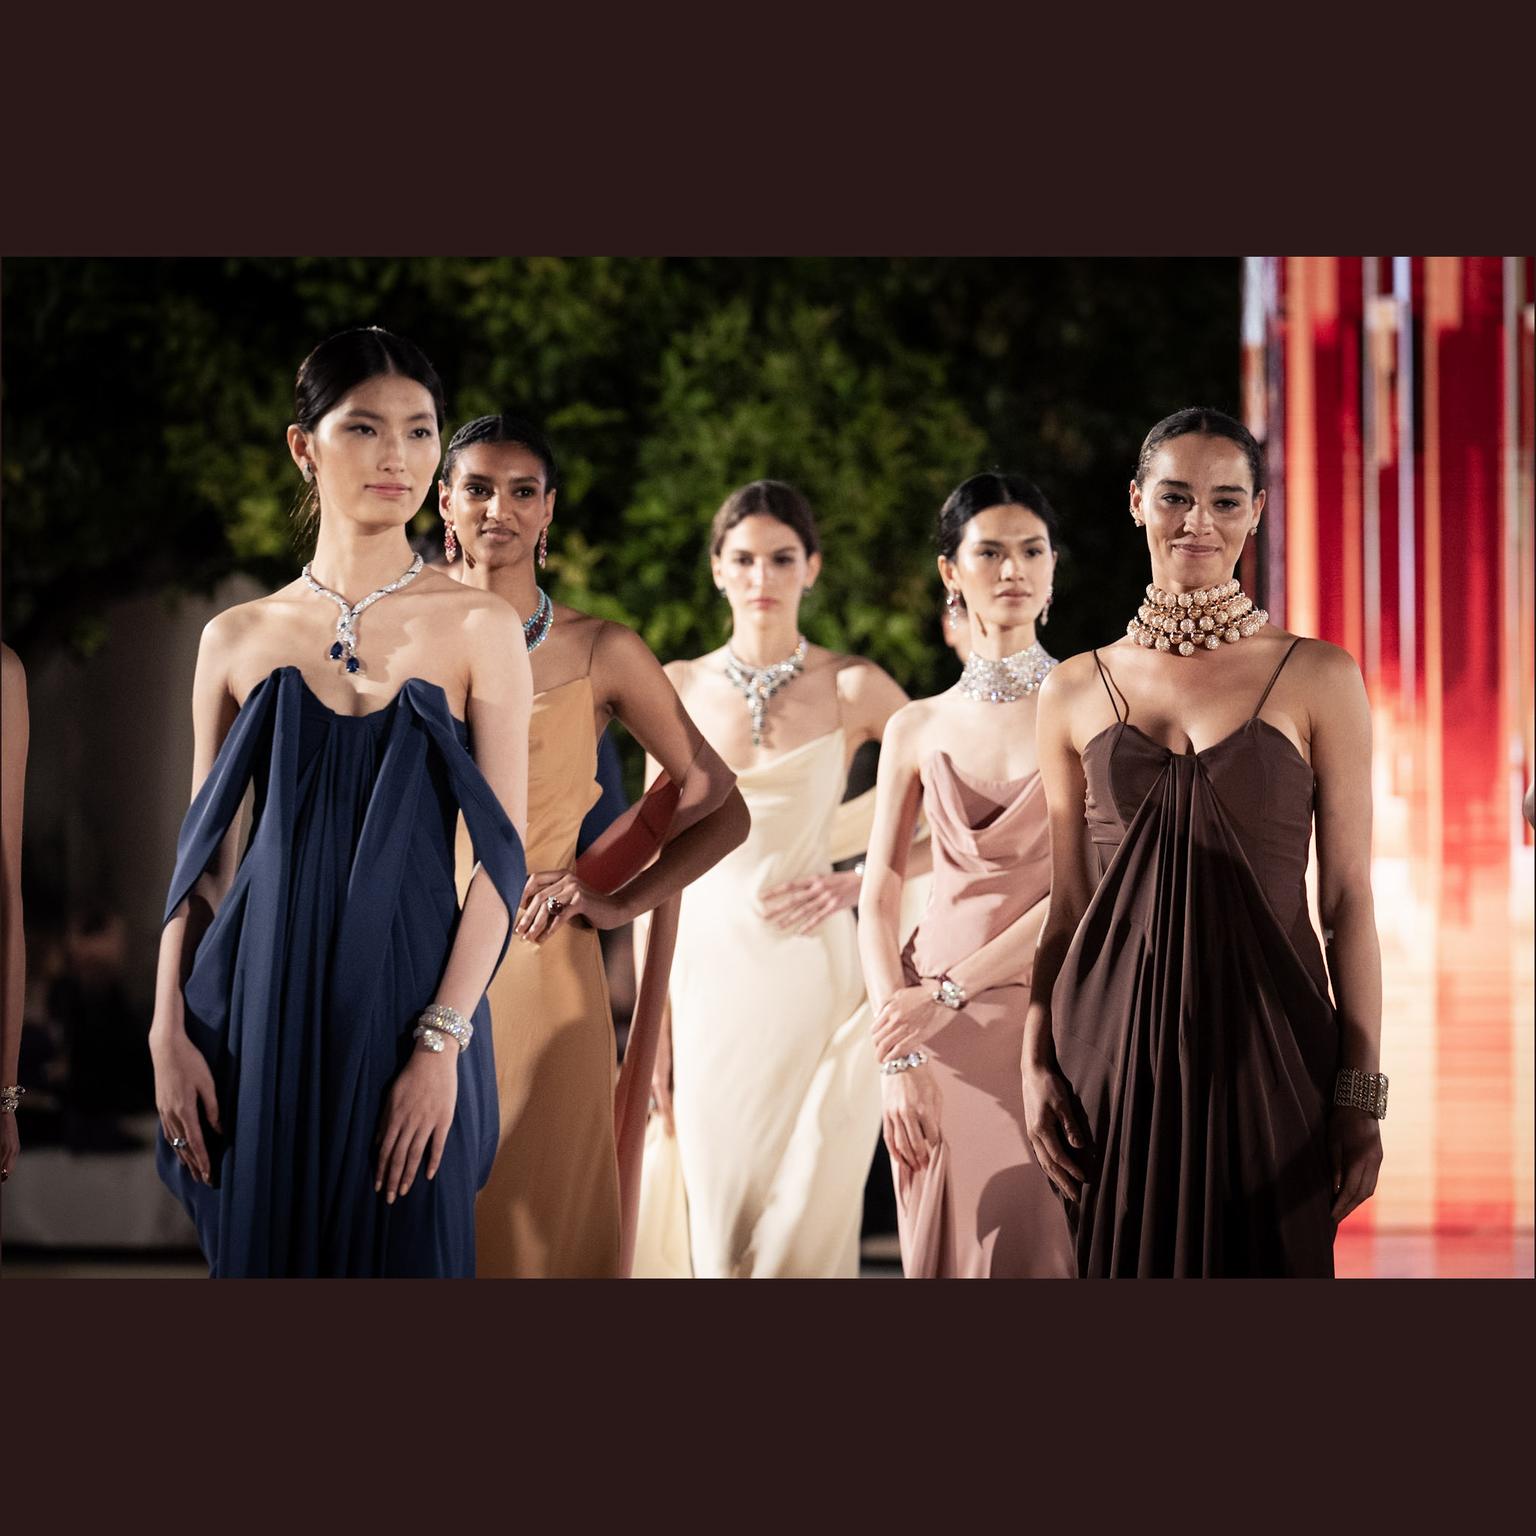 Aeterna, the collection, released in the brand’s 140th anniversary year on the catwalk